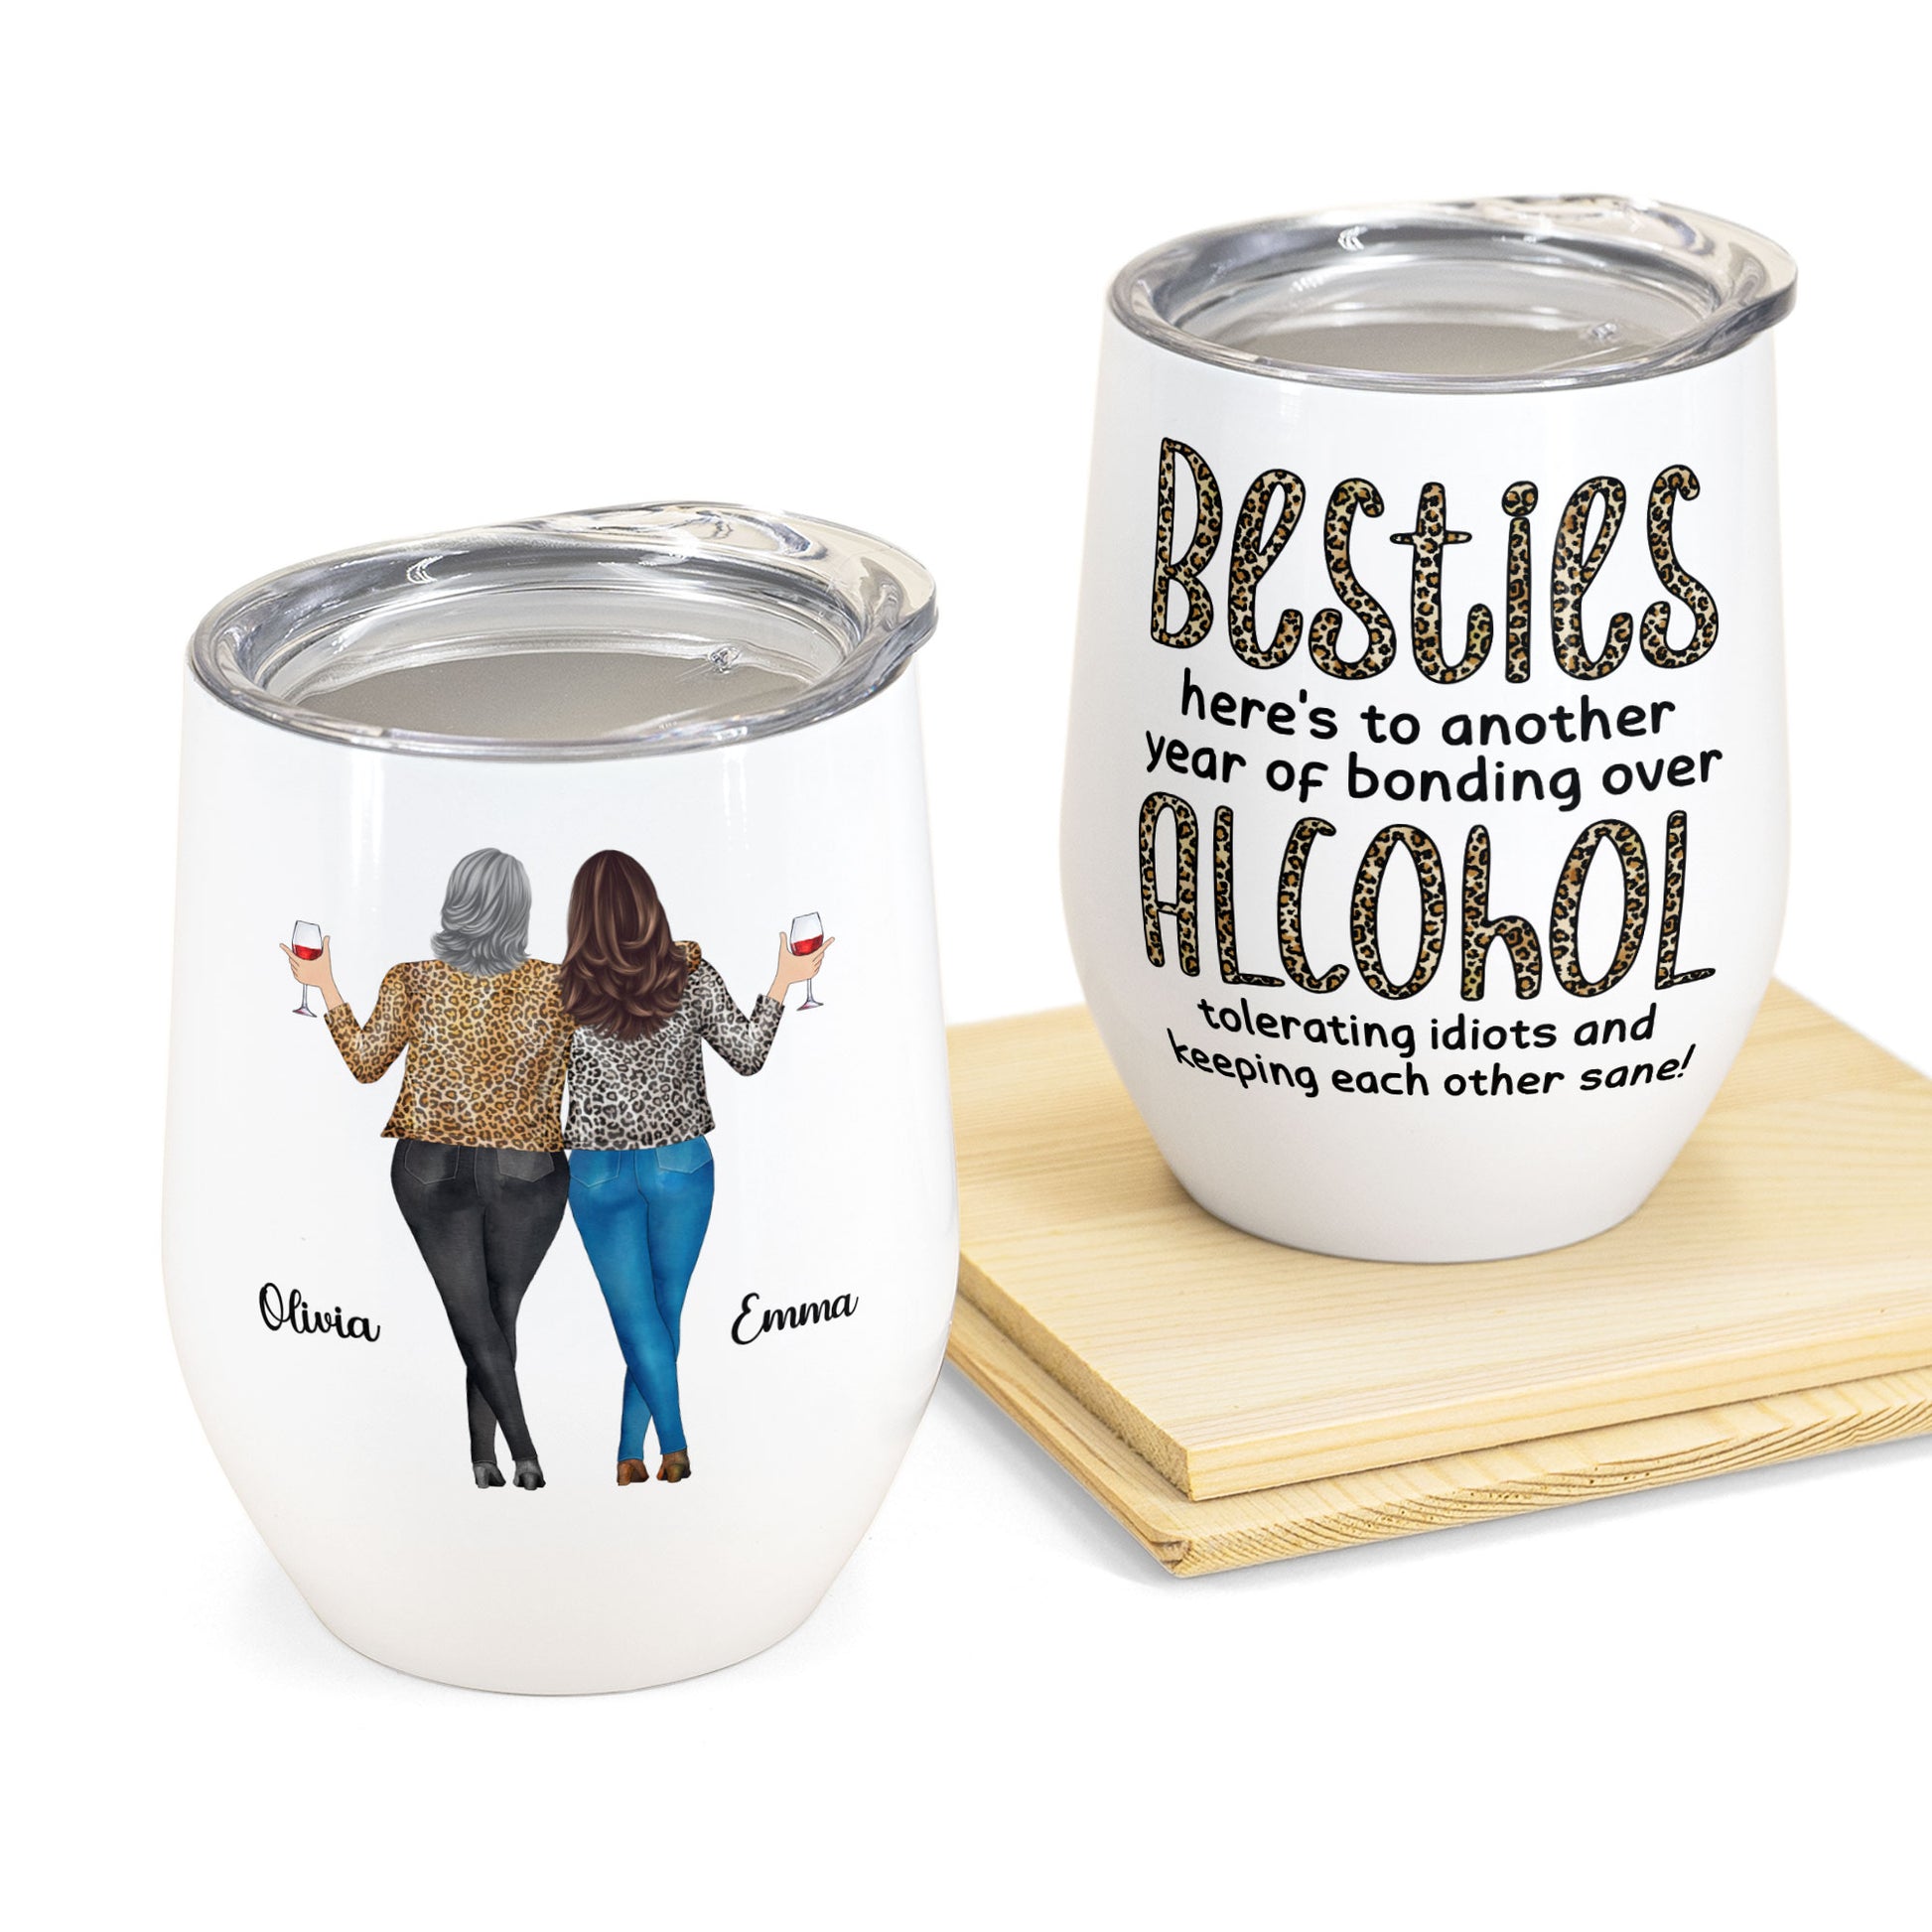 https://macorner.co/cdn/shop/products/Besties-Alcohol-Tolerating-Bonding-Over-Keeping-Each-Other-Sane--Personalized-Wine-Tumbler-Birthday-New-Year-Gift-For-Besties-Soul-Sisters-Sistas-BFF-Friends-Leopard-Pattern-Jacket-Wo_8a2dc7c1-e92a-4f65-971c-20584de95857.jpg?v=1639972748&width=1946